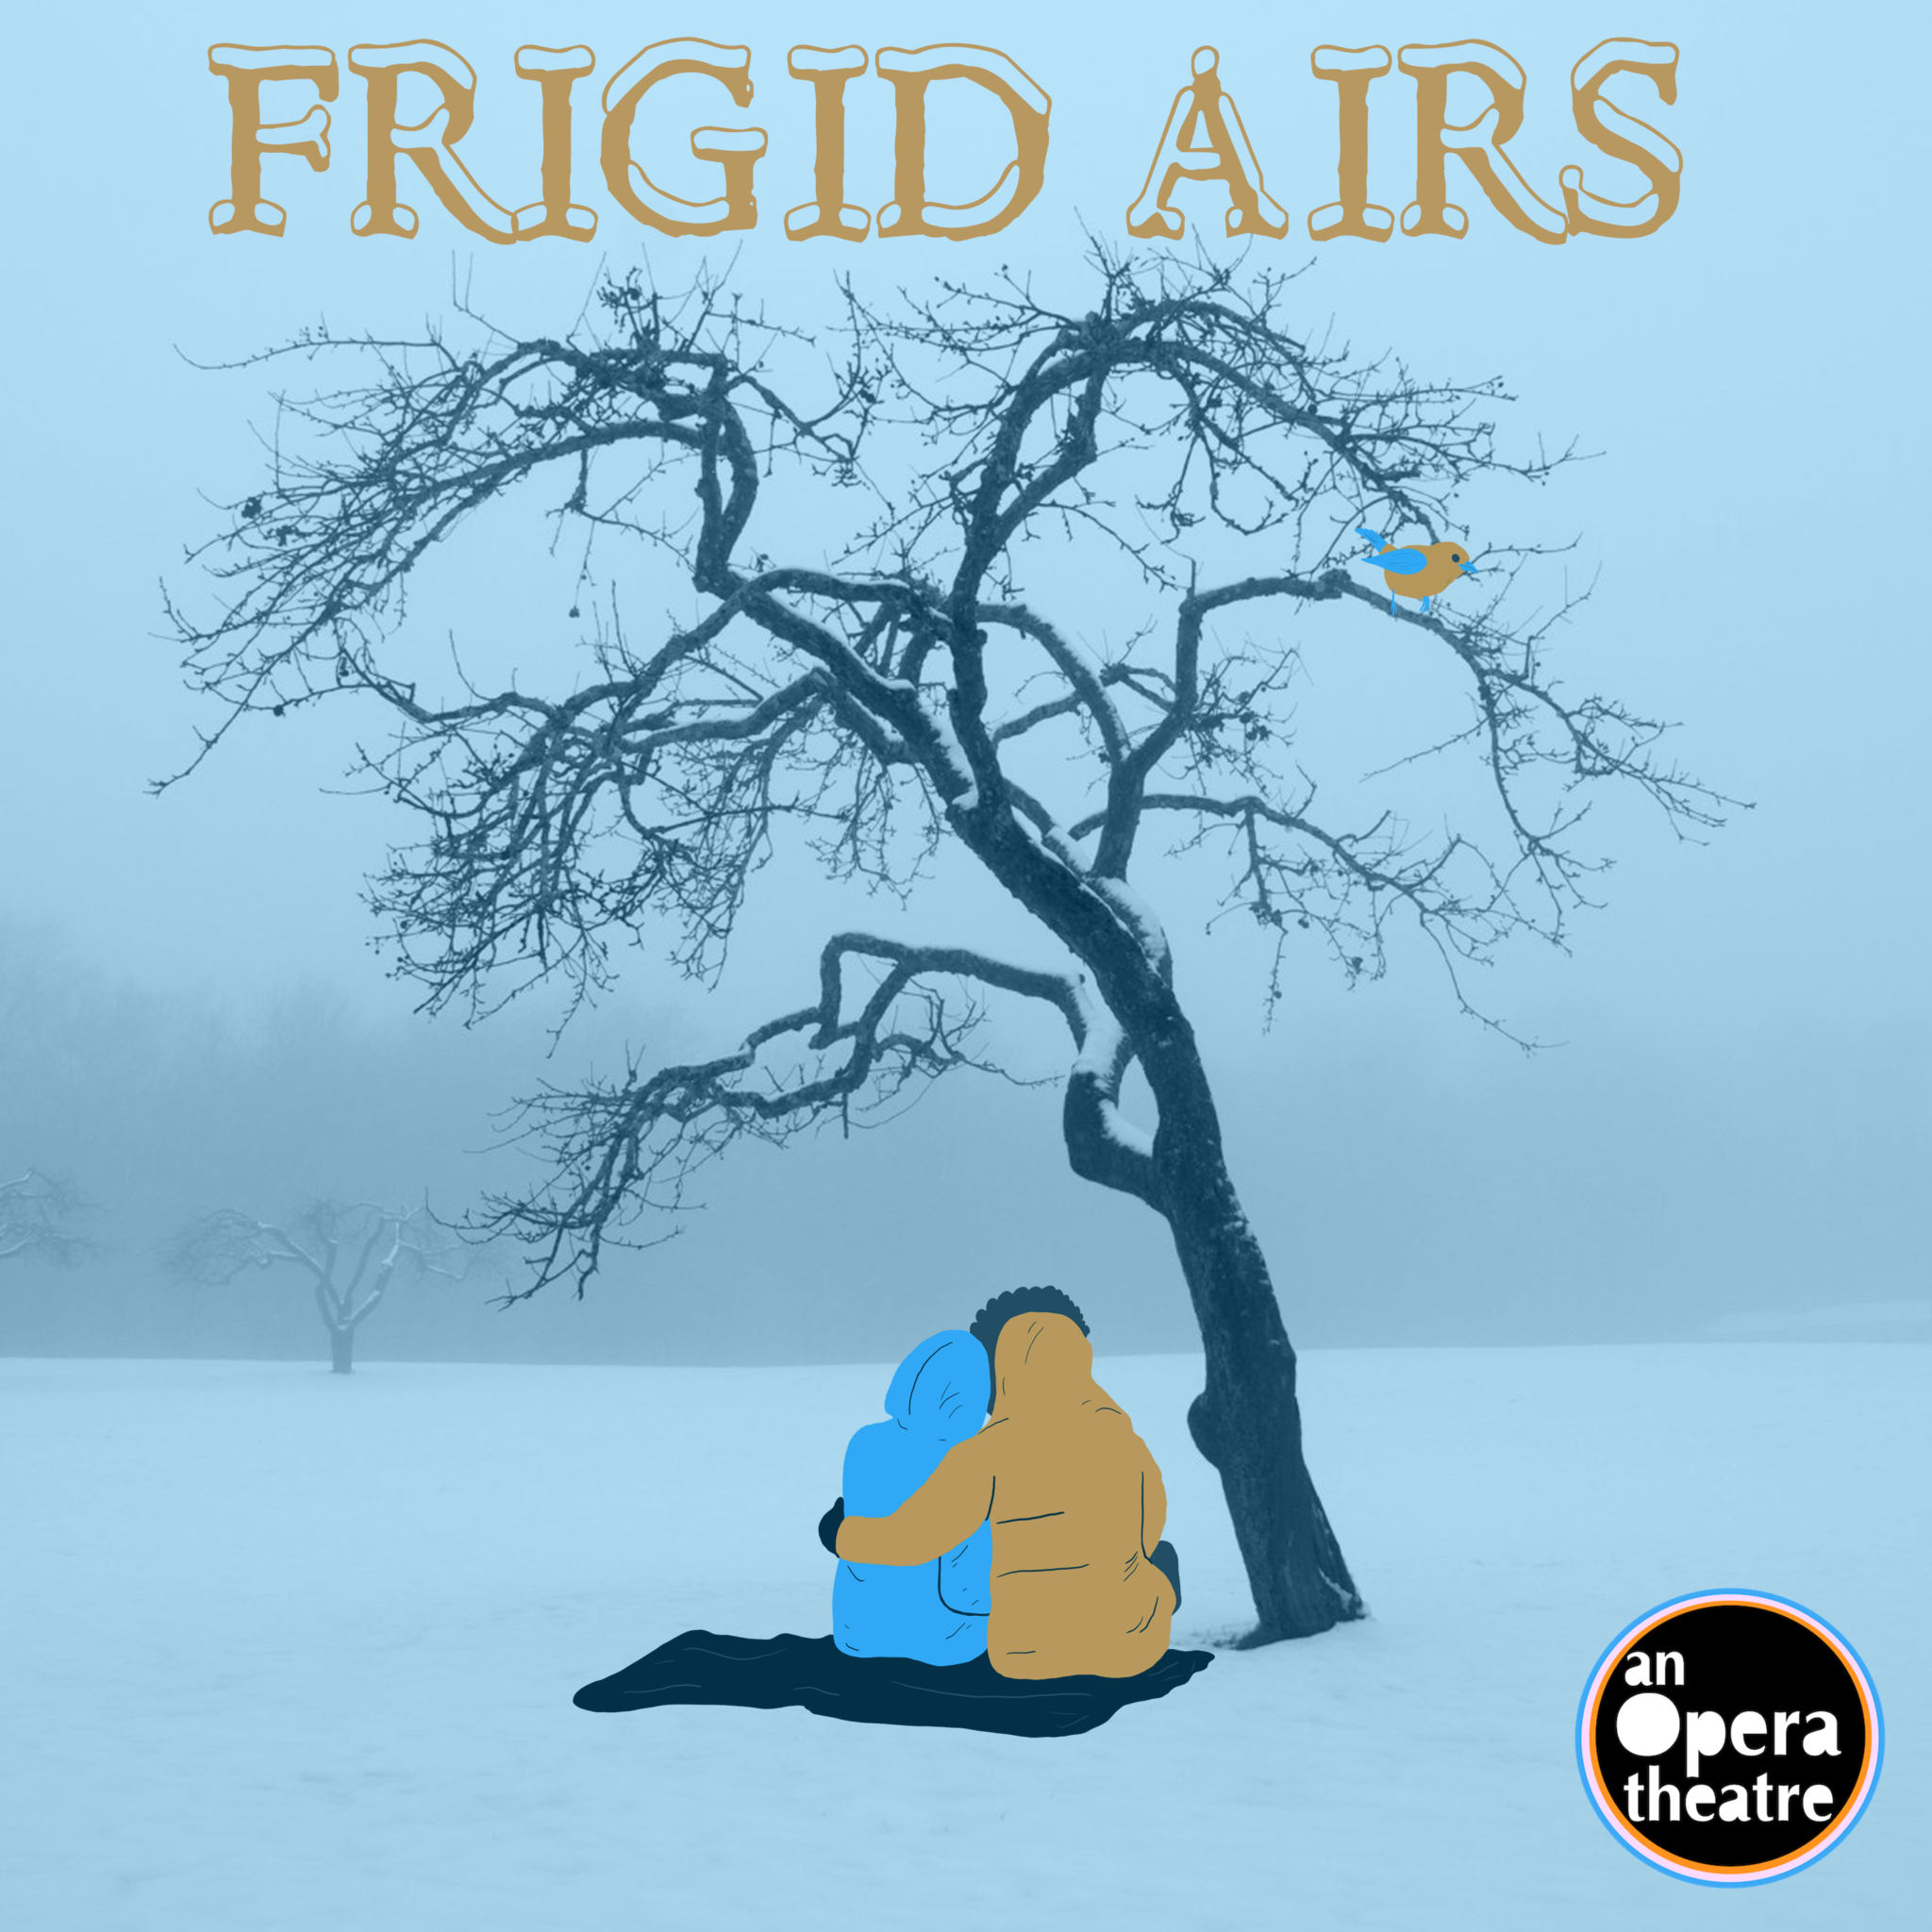 an illustration of a tree with bare limbs and two people sitting below it. Words read "Frigid Airs" at the top, and a logo for "An Opera Theatre" is at the bottom.